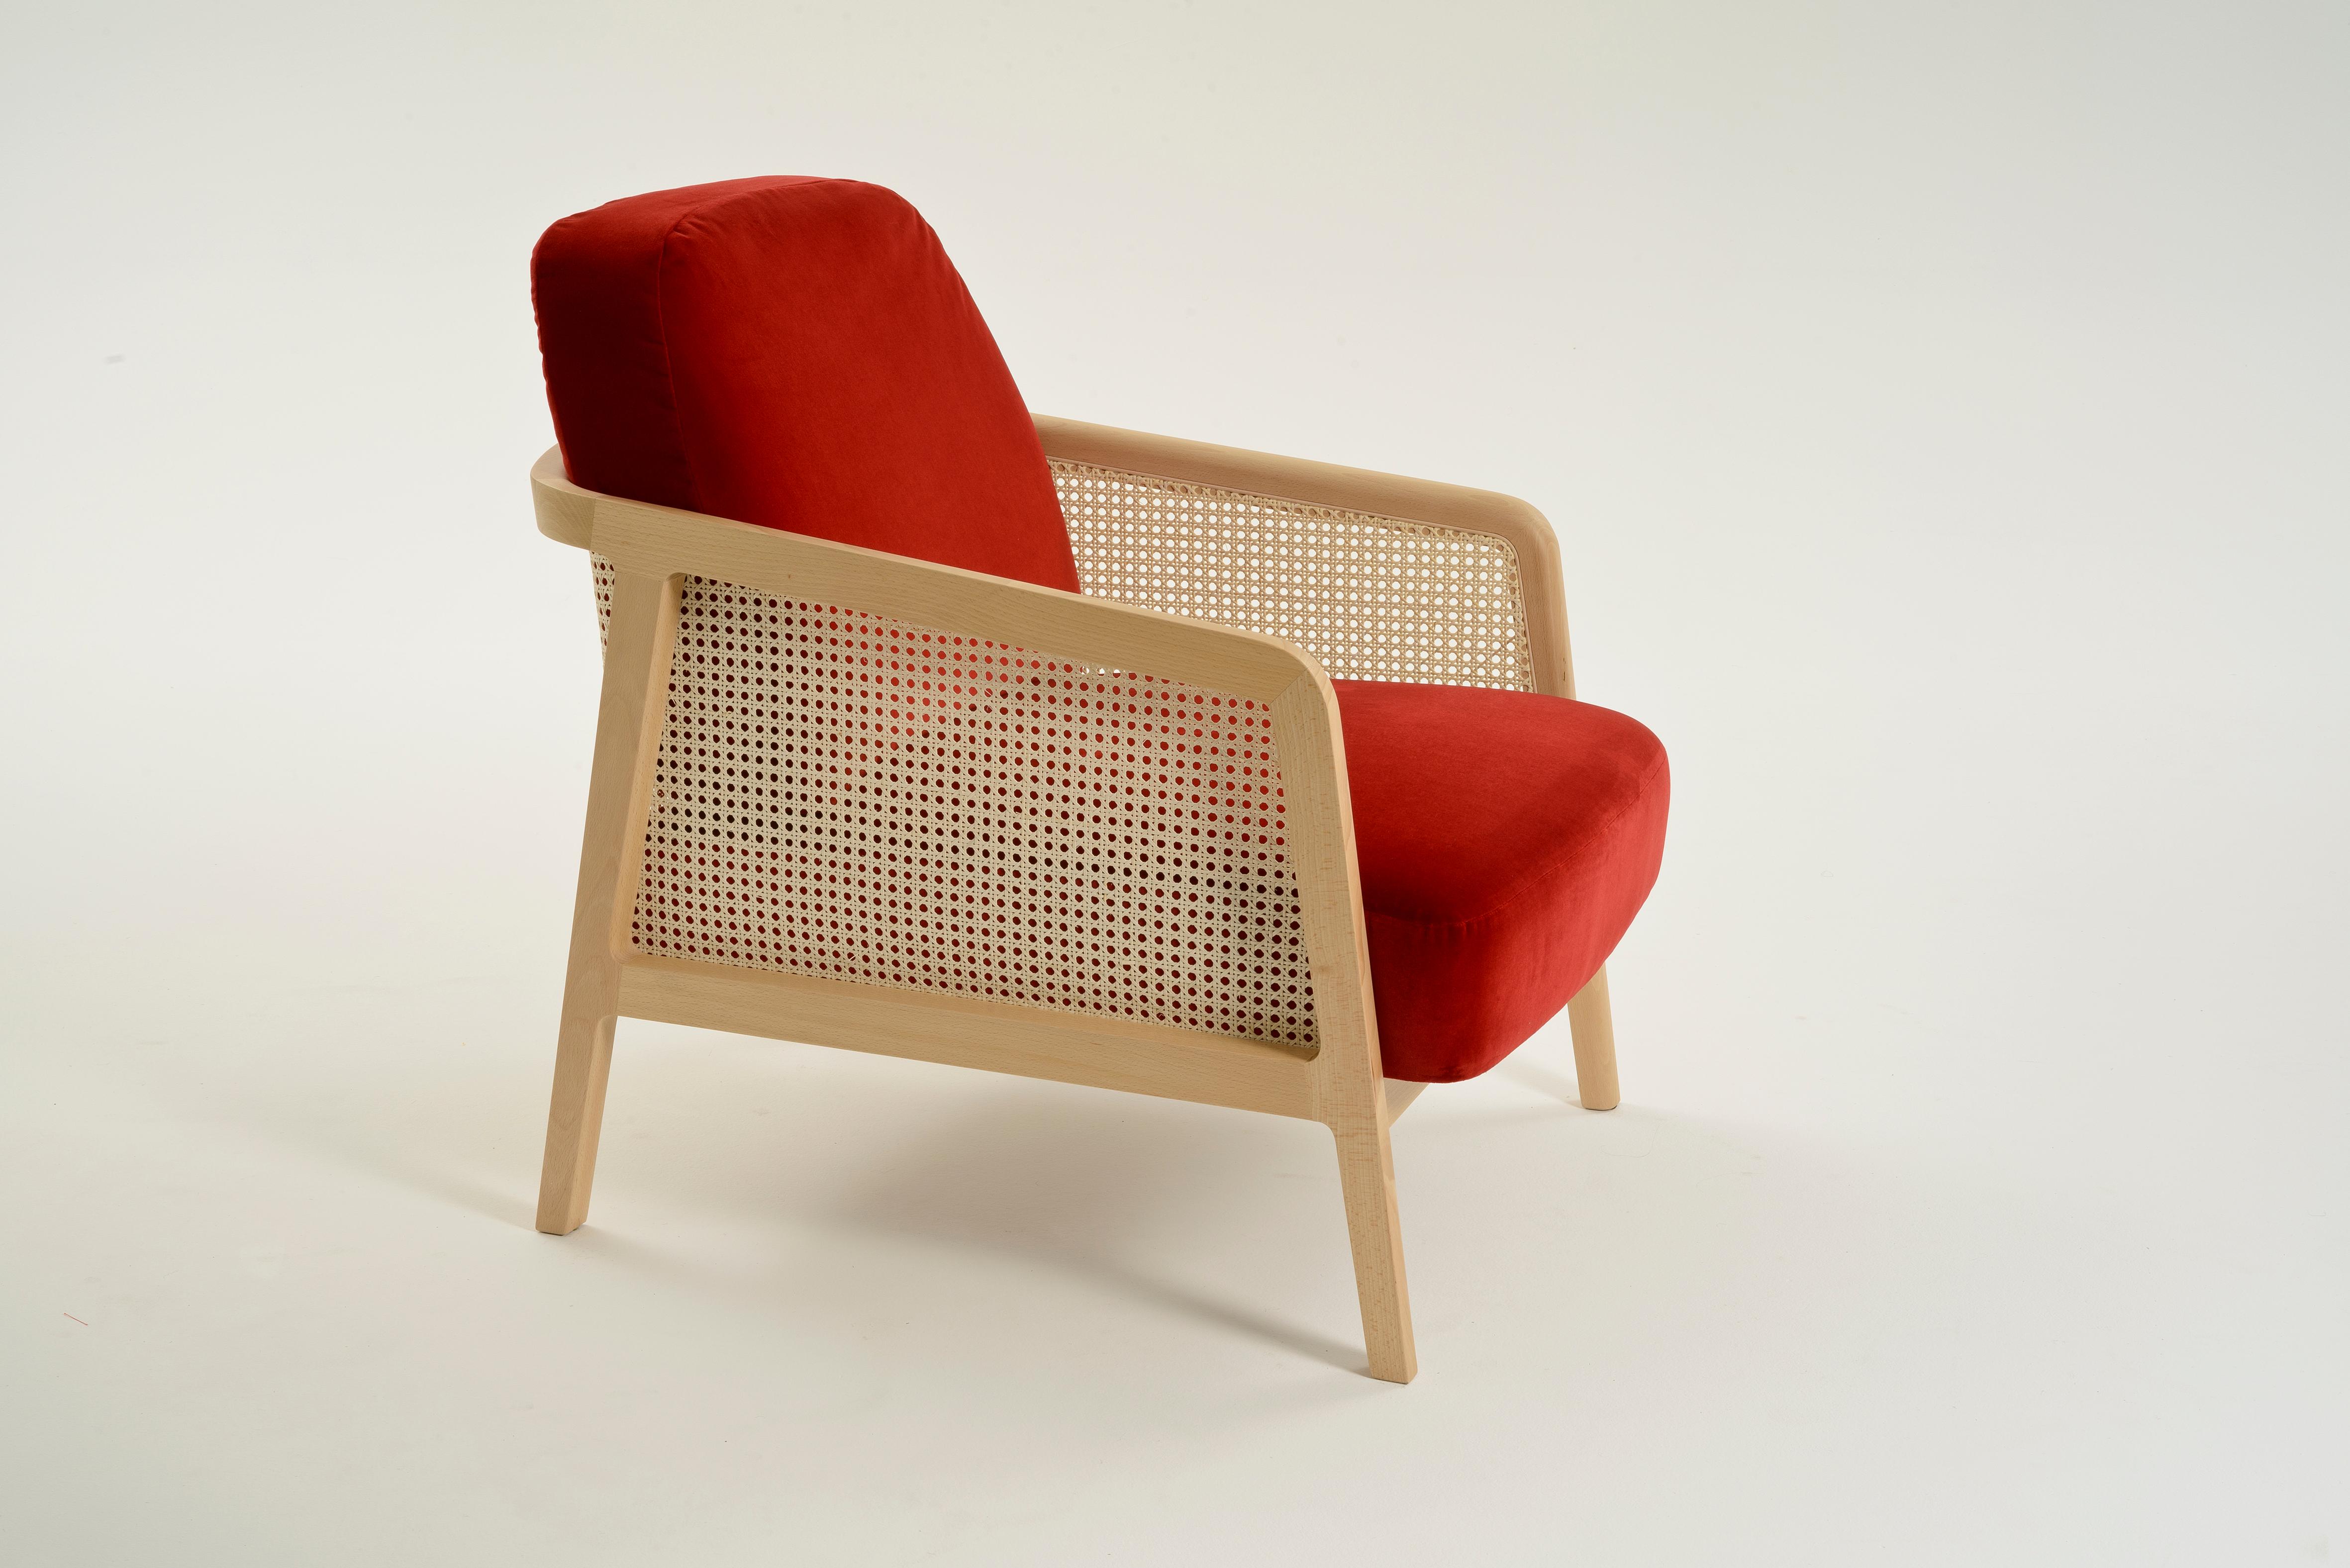 Vienna longue
A living room armchair in wood and straw, that recalls the exclusive club atmosphere but in a contemporary key. Vienna is an extraordinarily comfortable and elegant lounge armchair designed by Emmanuel Gallina who loves to quote